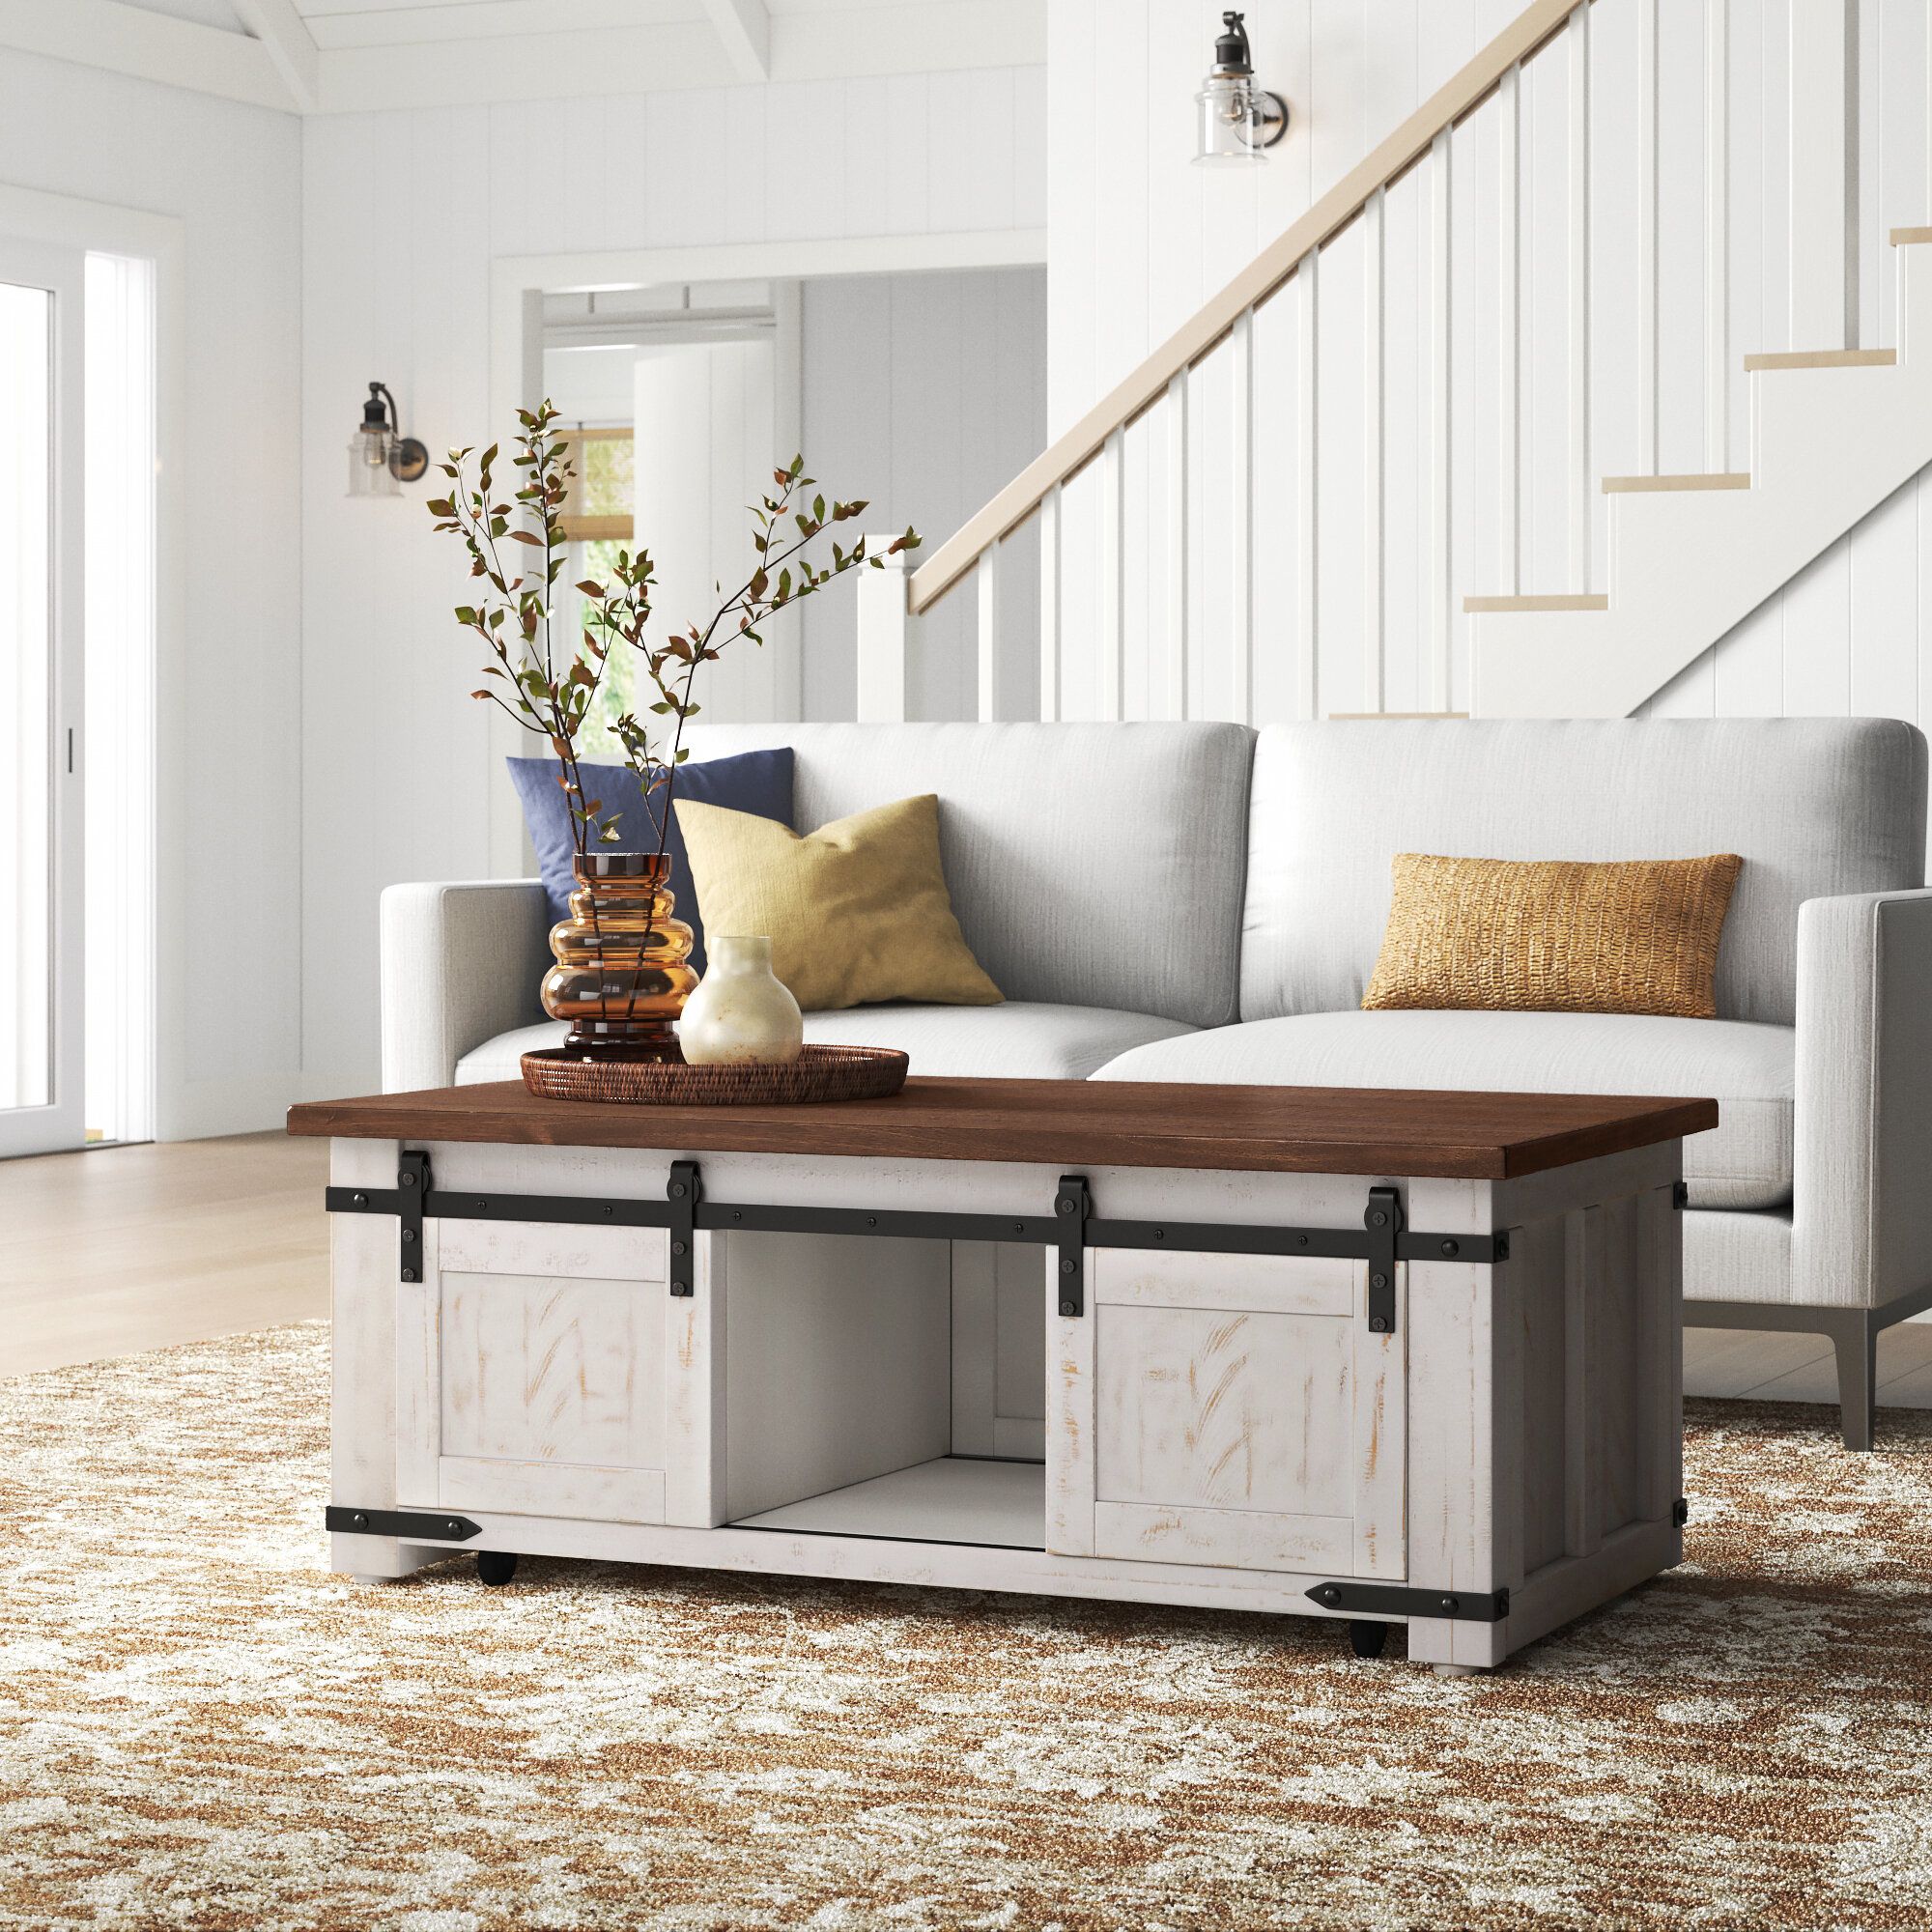 Sand & Stable Sean Coffee Table & Reviews | Wayfair For Coffee Tables With Storage And Barn Doors (View 12 of 15)